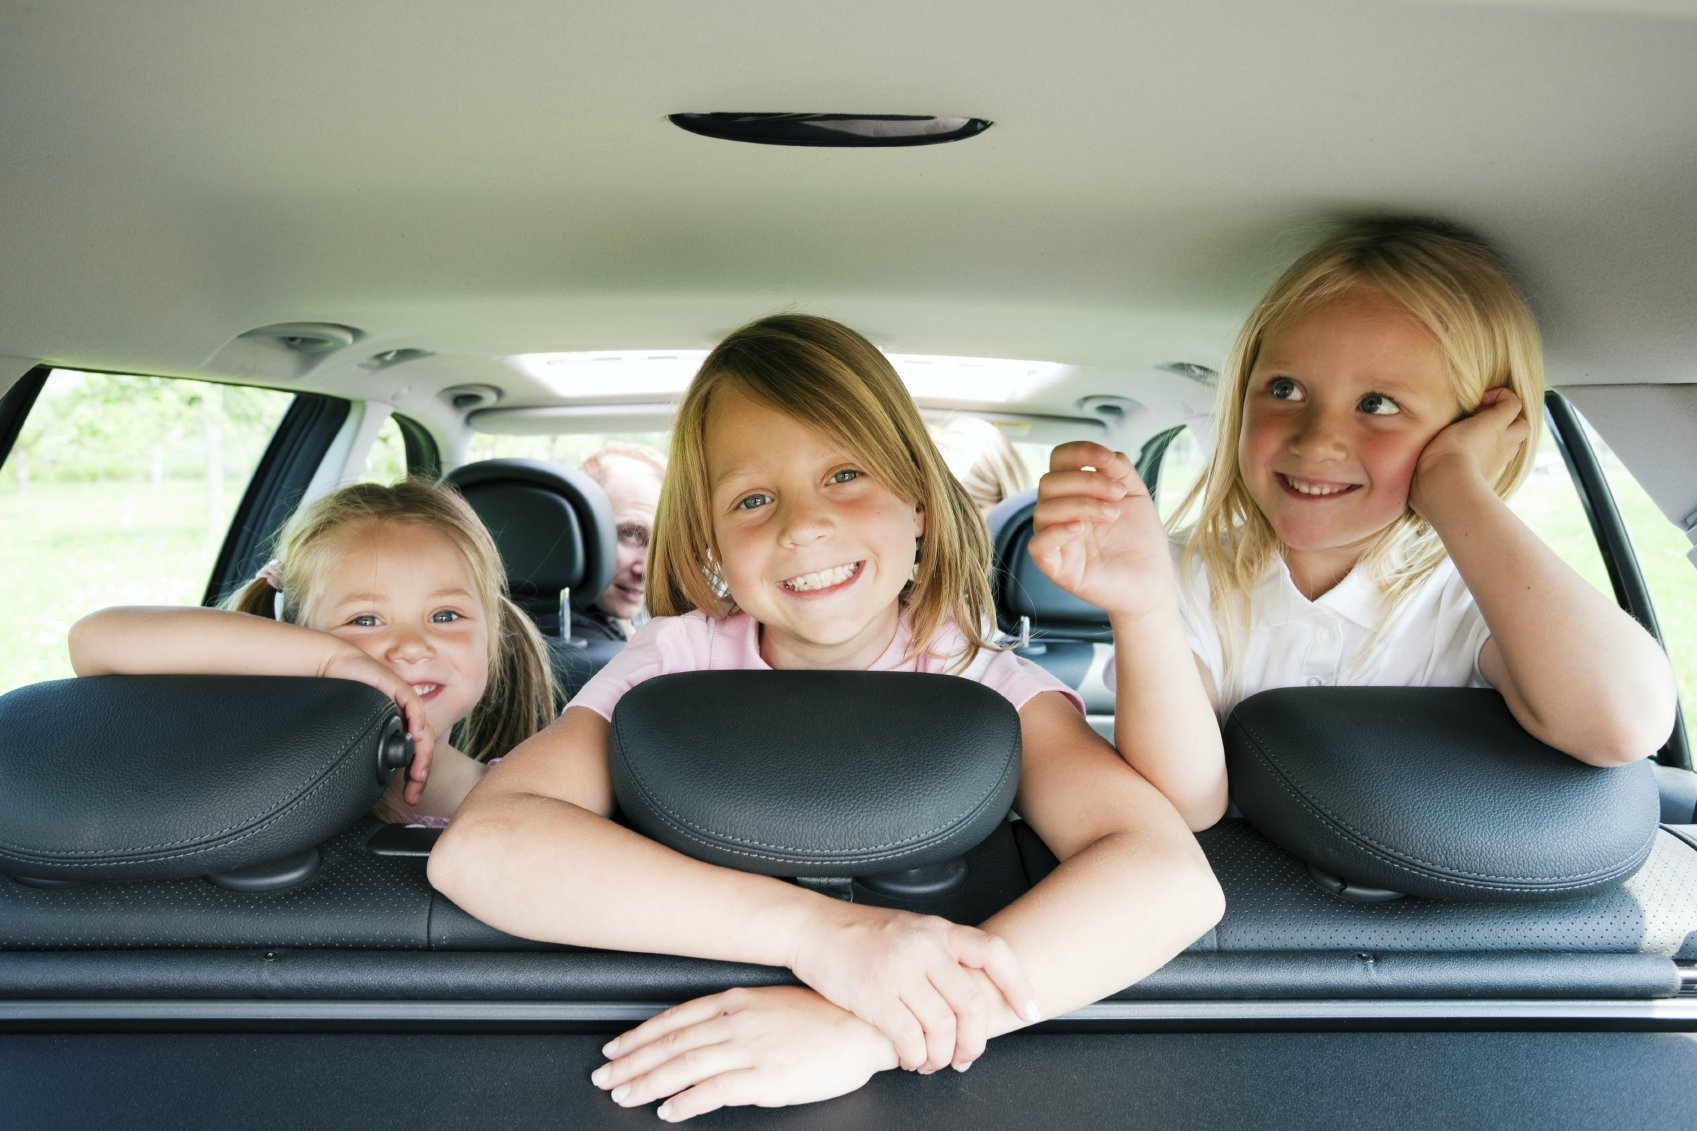 Transfers to Hotel Rocamarina with car baby seats